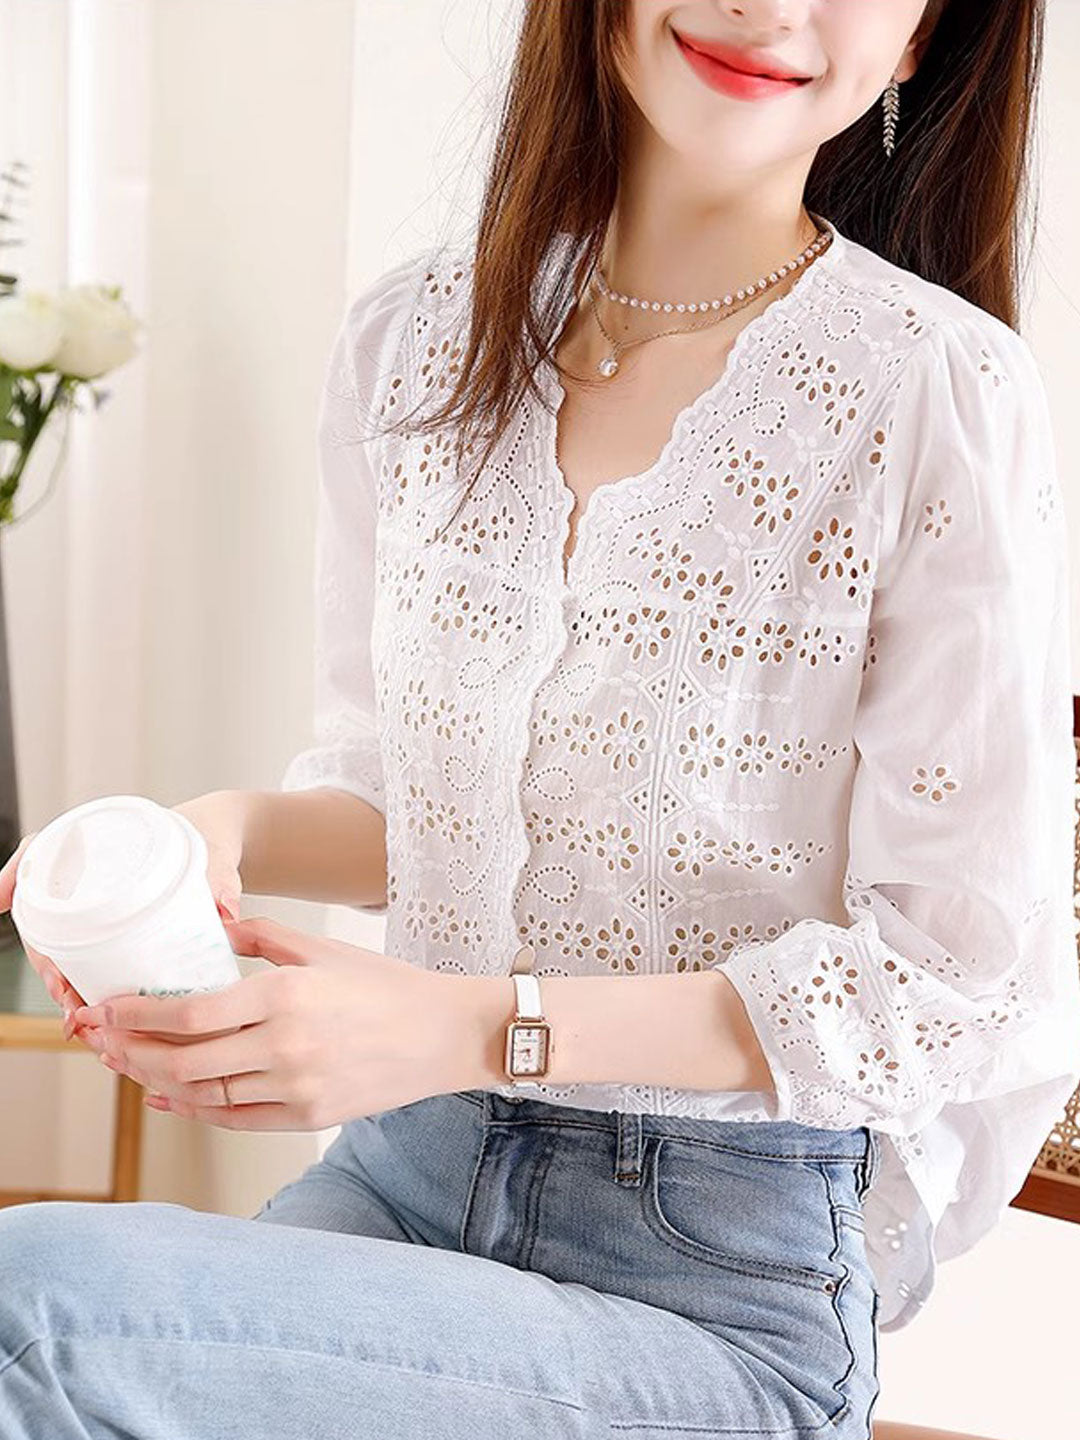 Kayla Retro V-Neck Embroidered Hollowed Top